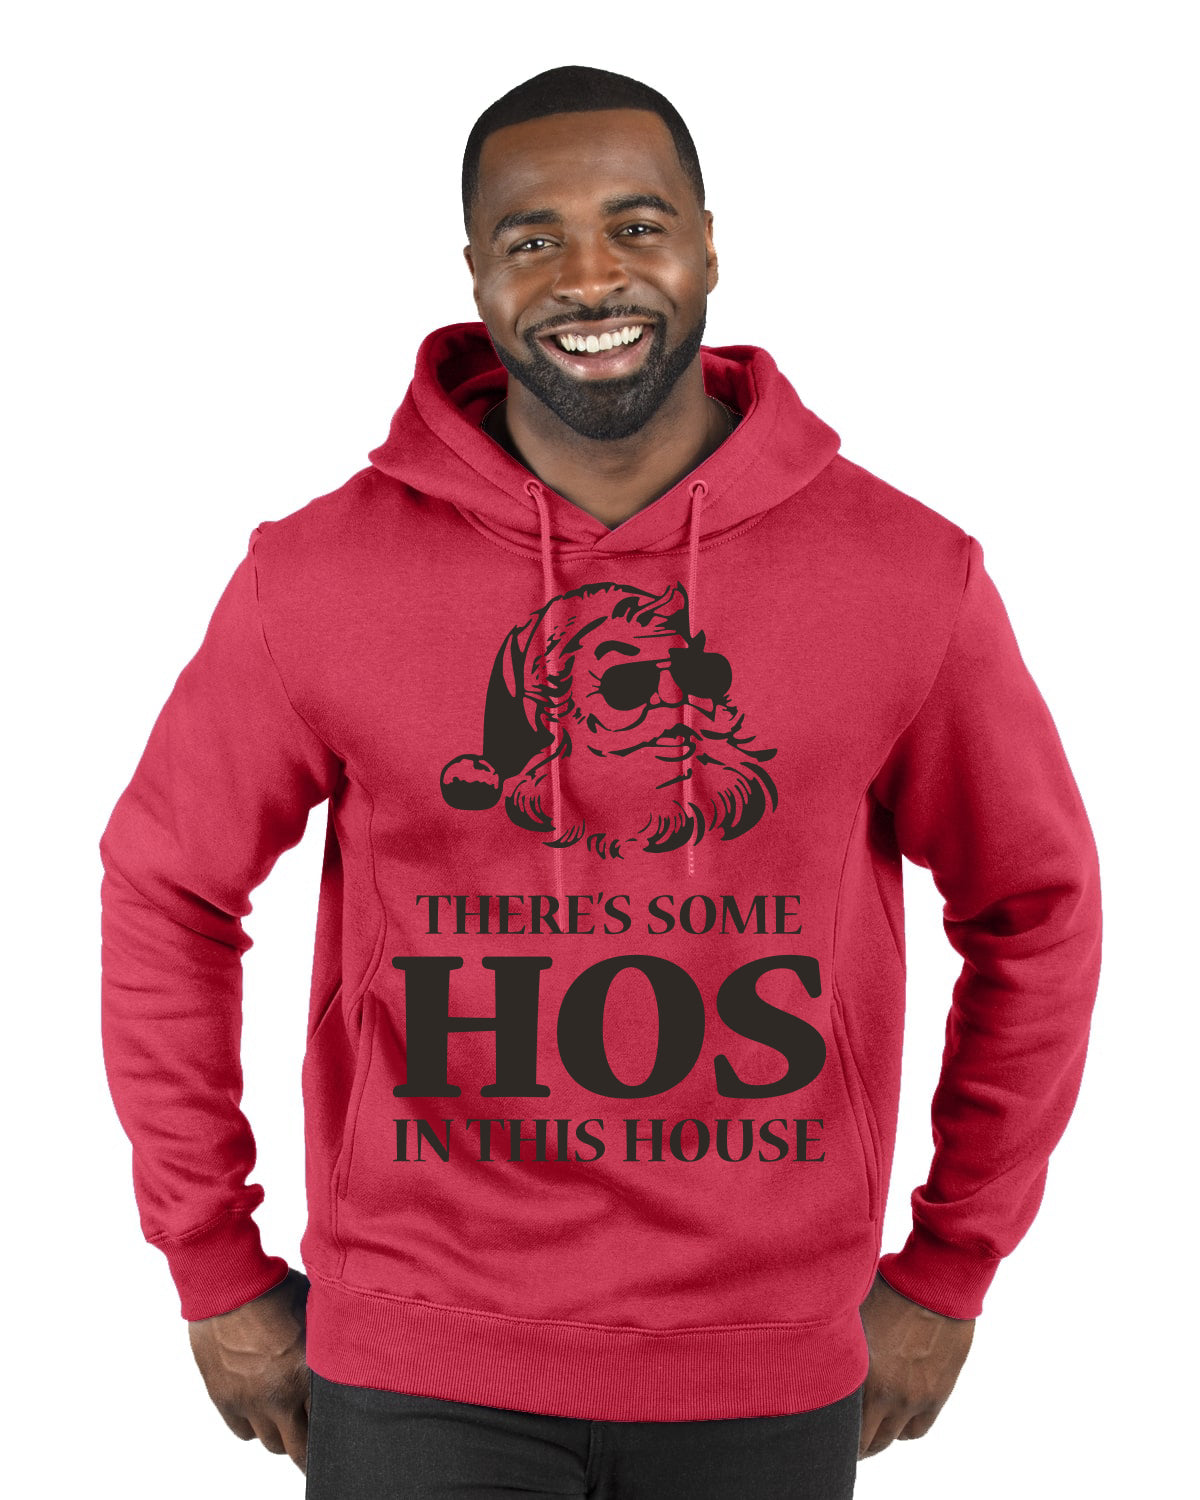 Theres some Hos in this House Ugly Christmas Sweater Premium Graphic Hoodie Sweatshirt